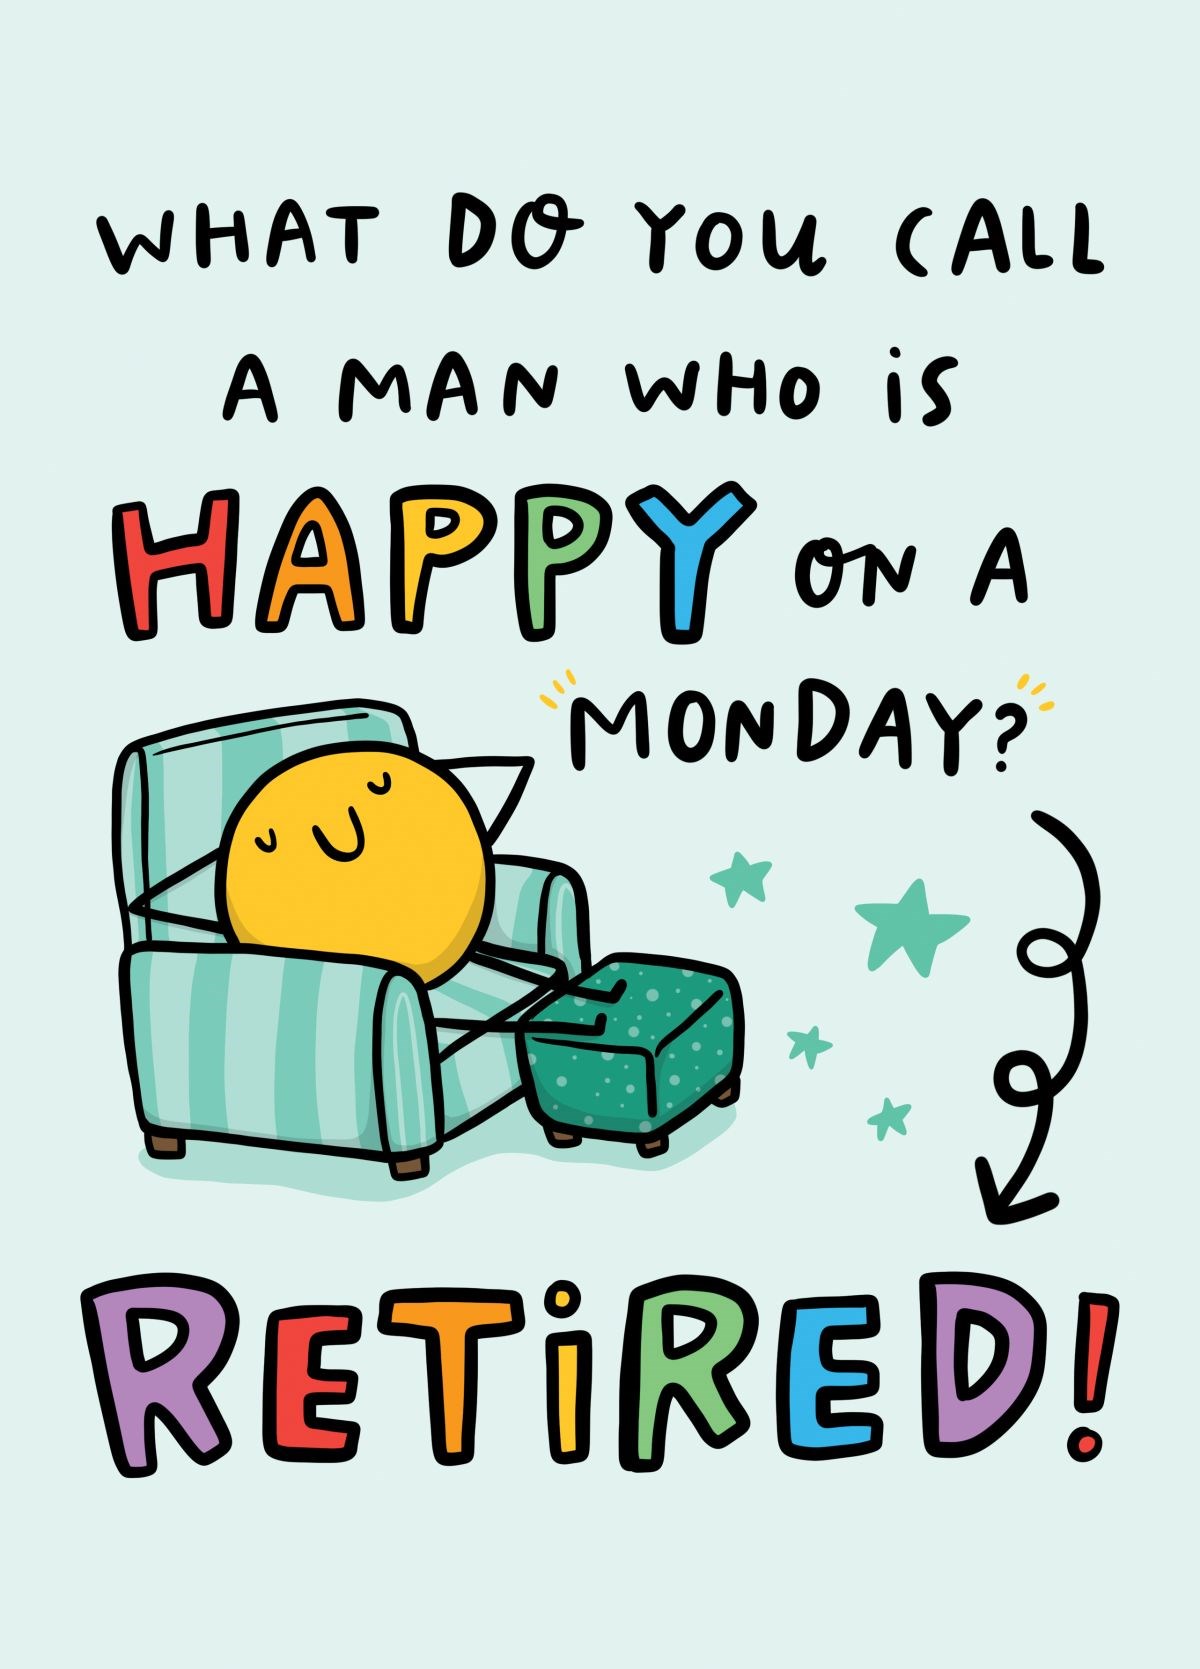 Happy On A Monday - Retired Man Card | Scribbler